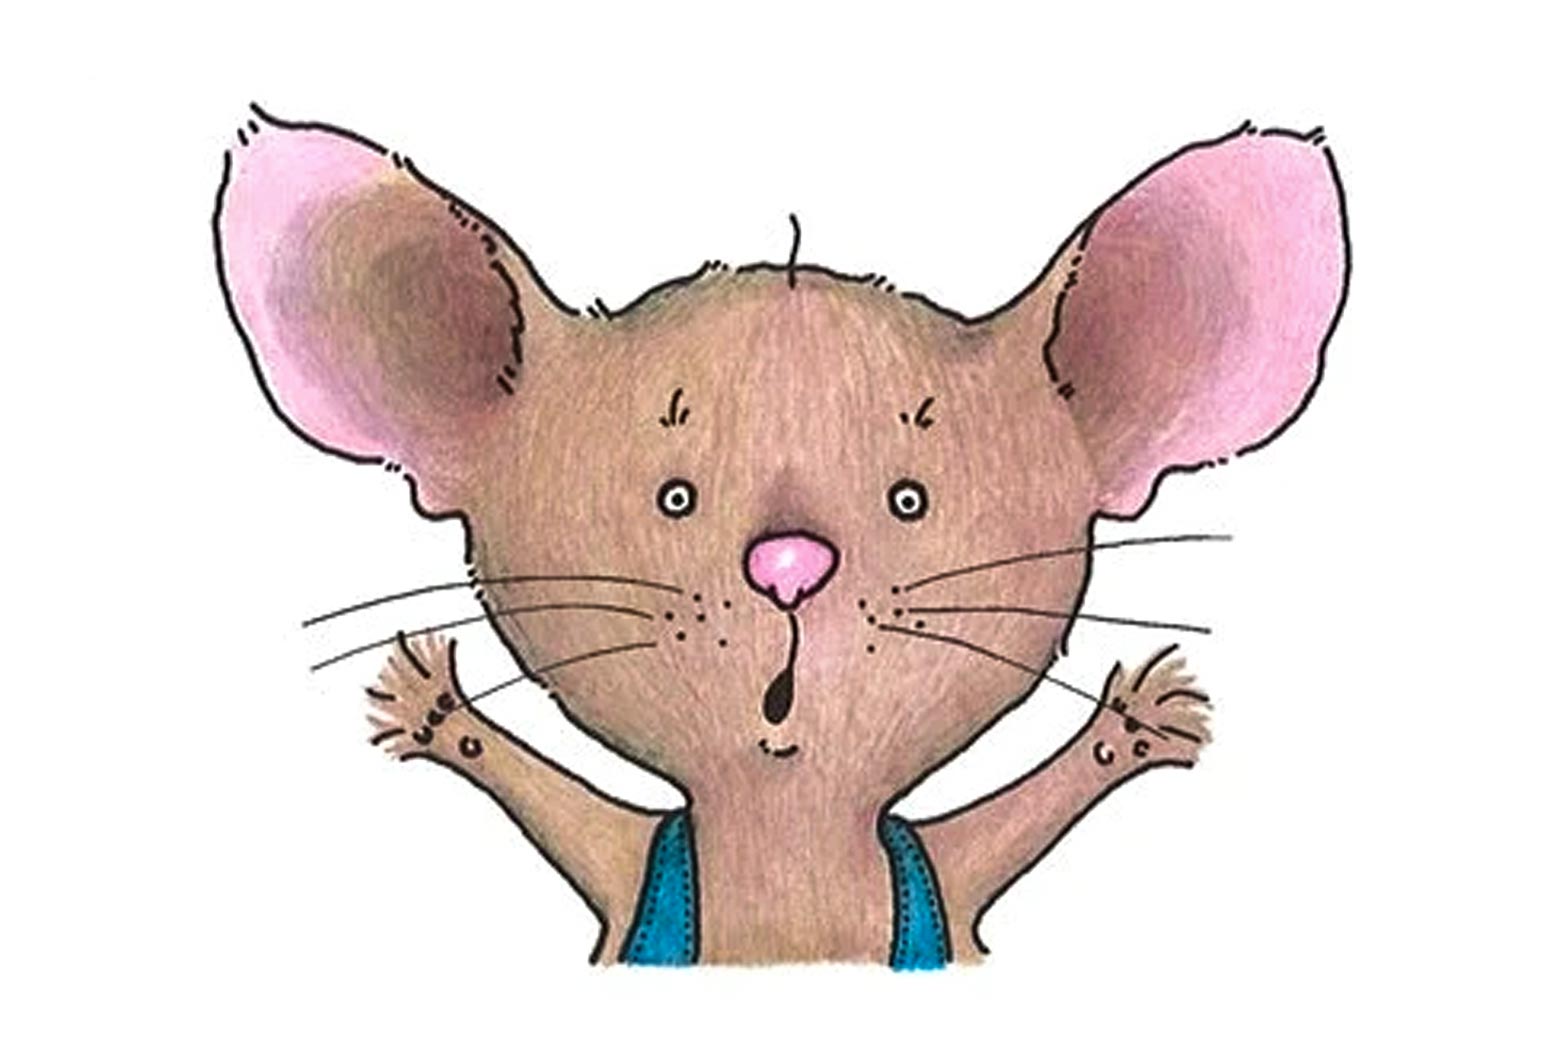 A hungry mouse from If You Give a Mouse a Cookie